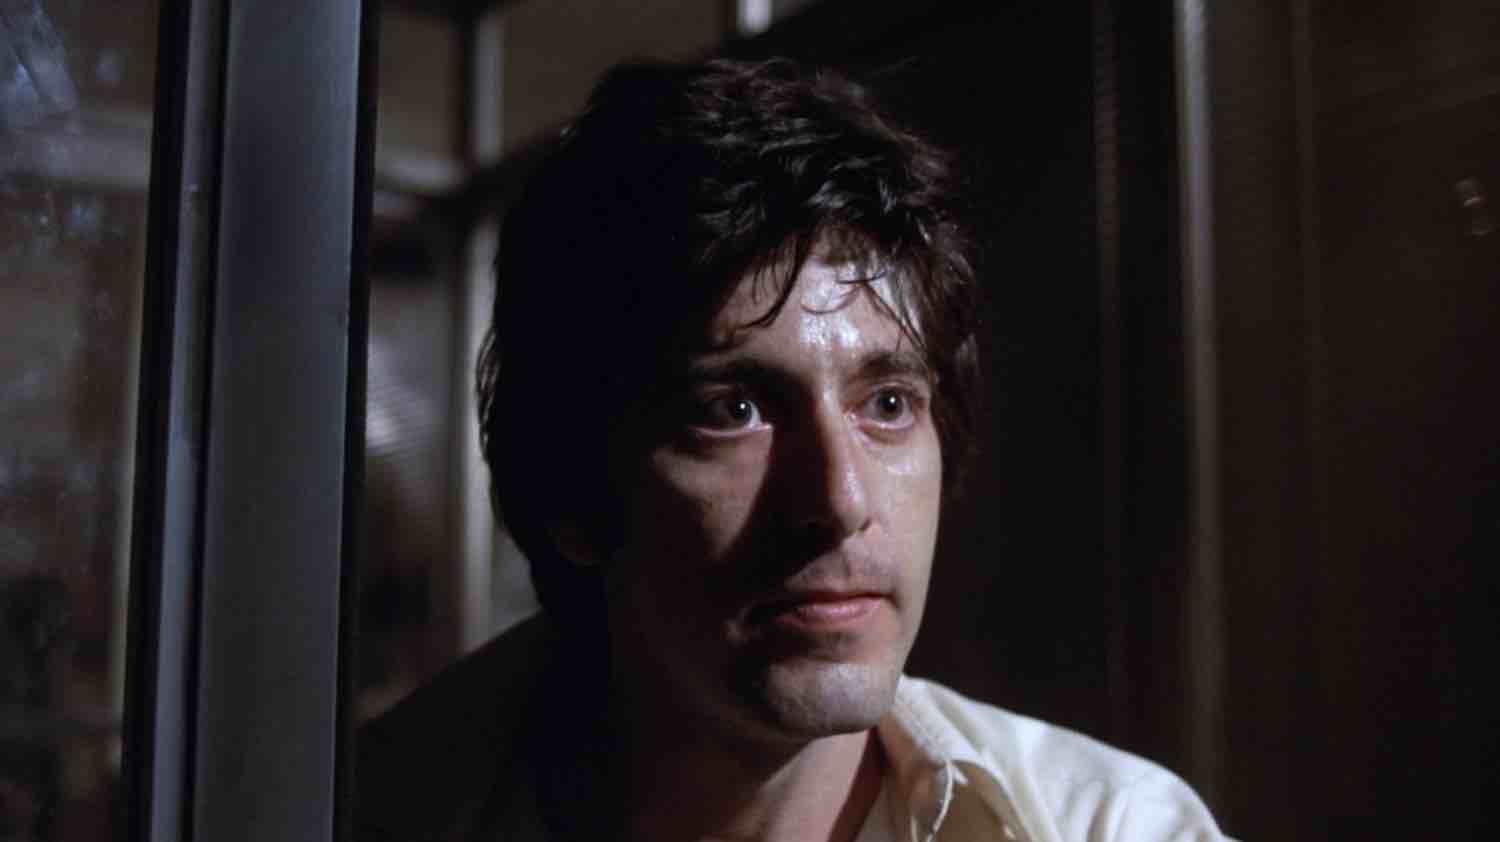 Dog Day Afternoon (1975) by Sidney Lumet